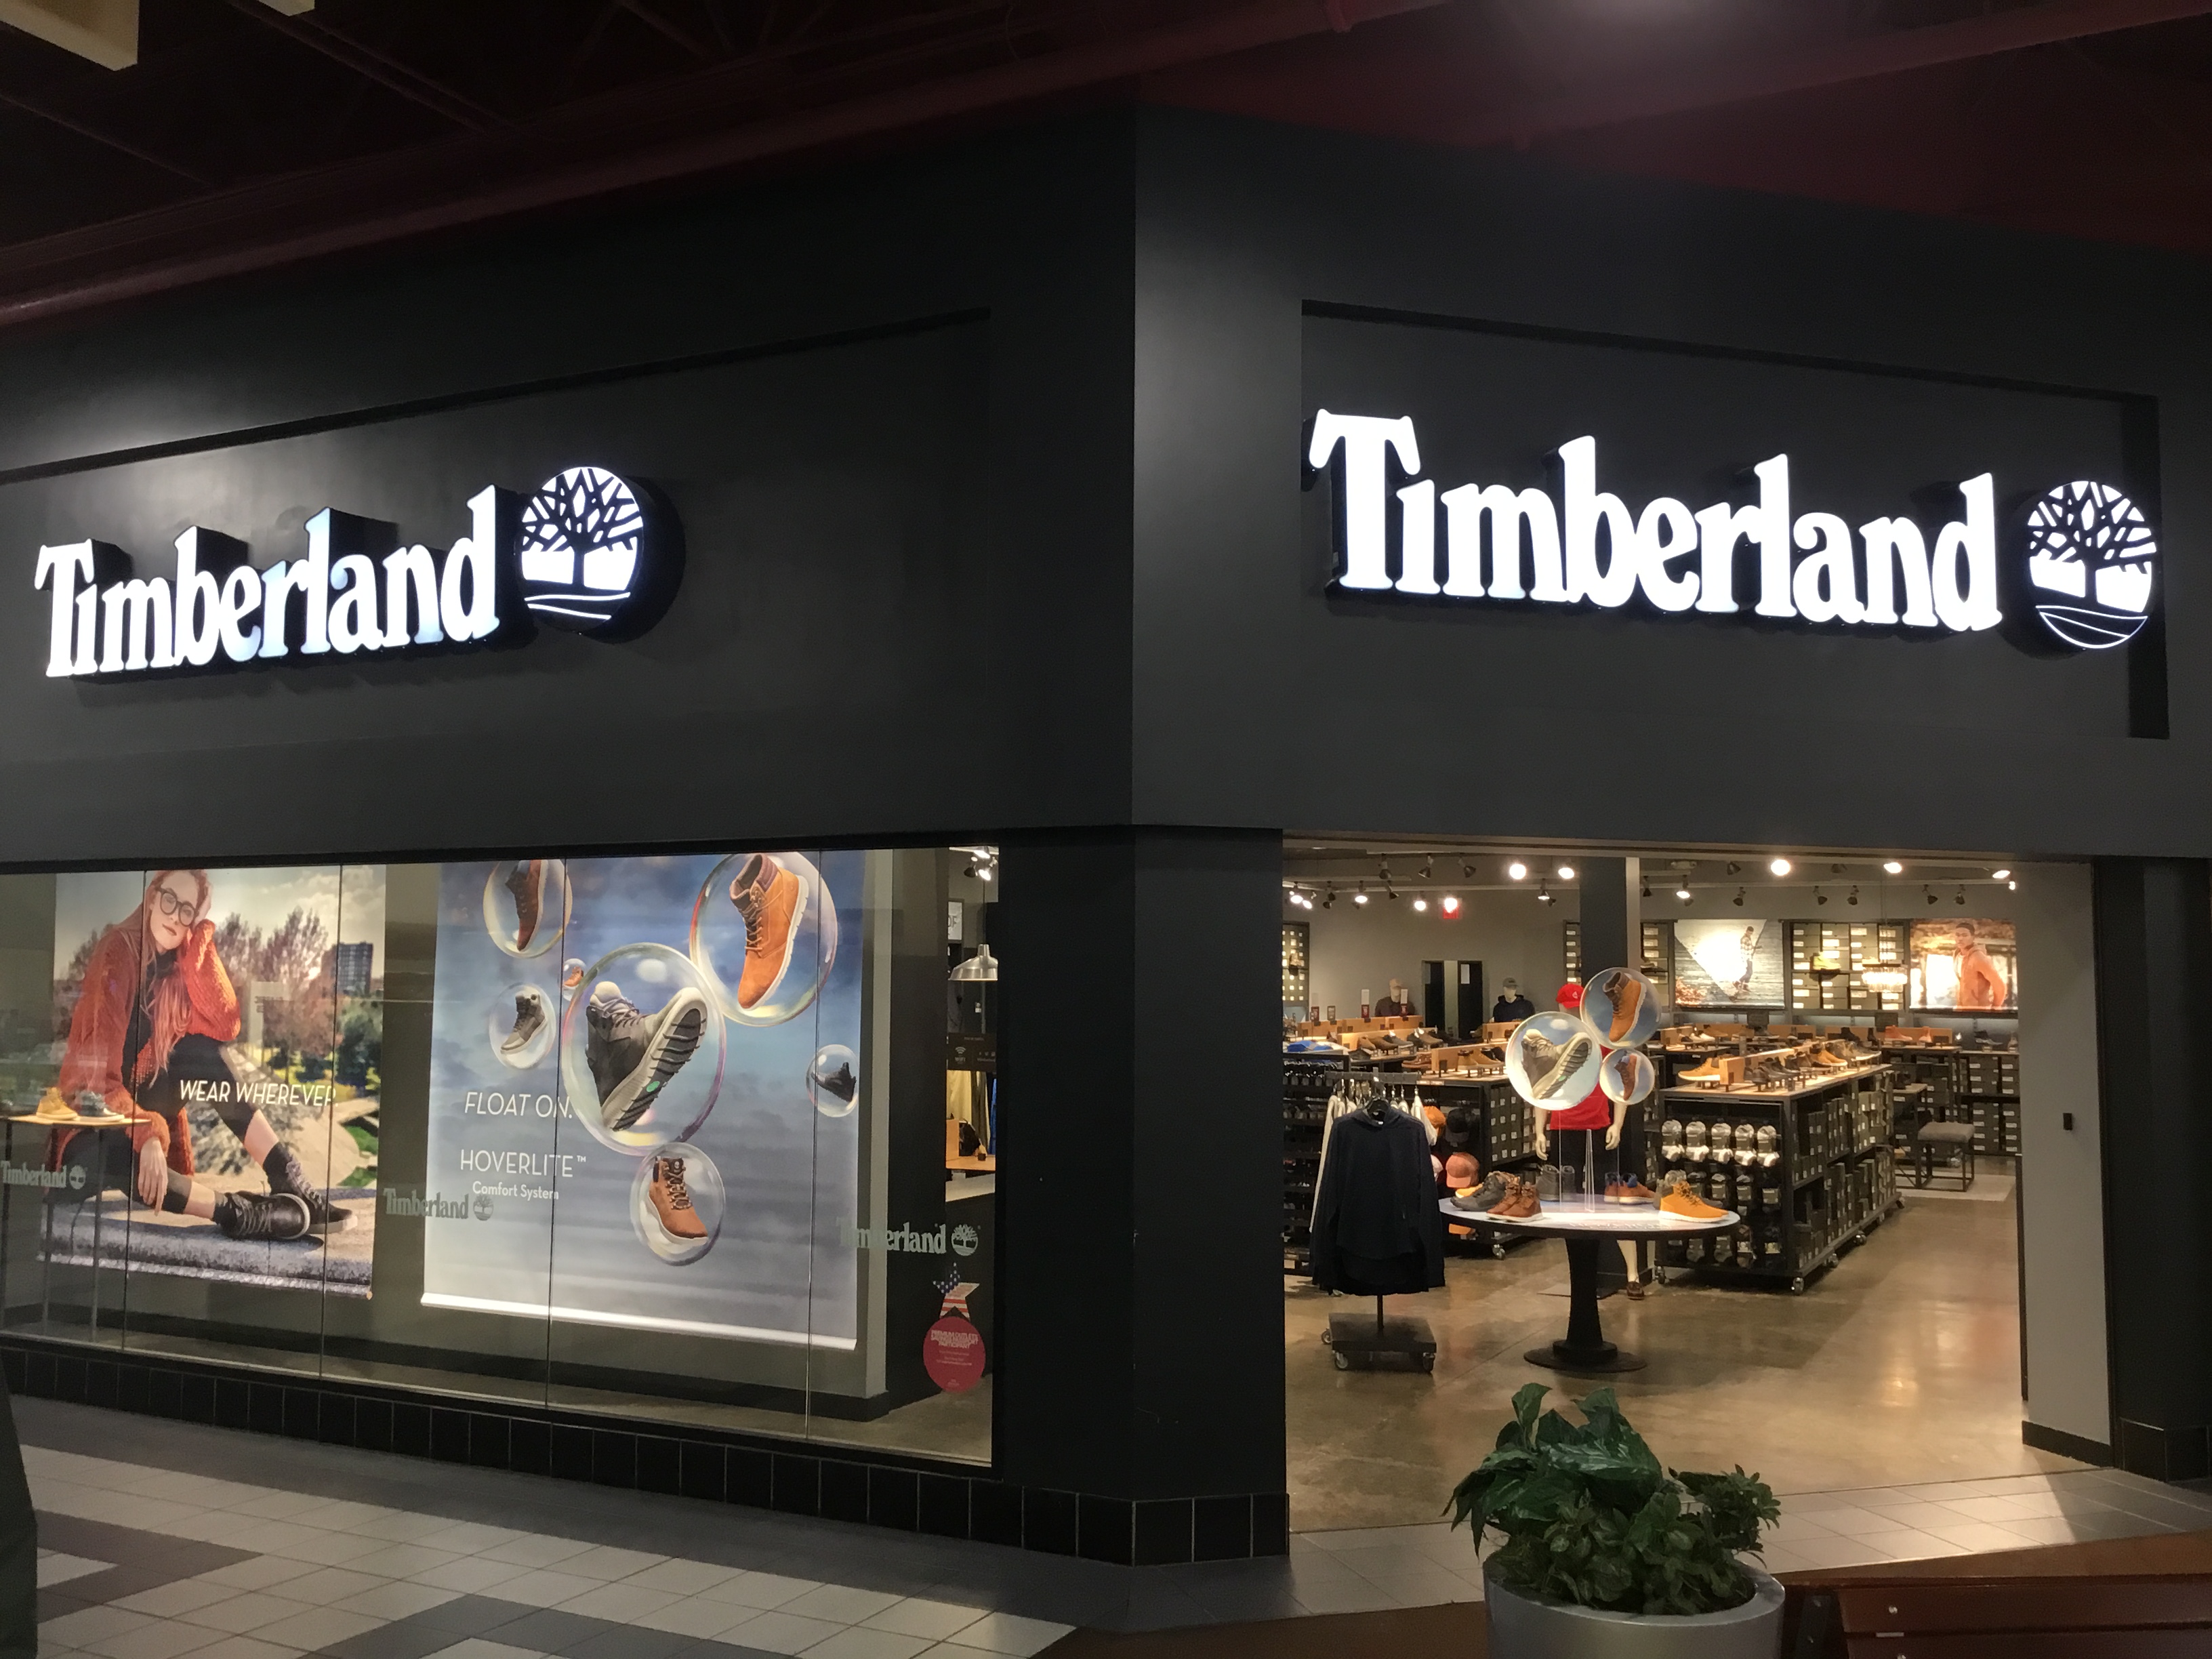 Temeridad adverbio Email Timberland - Boots, Shoes, Clothing & Accessories in Las Vegas, NV